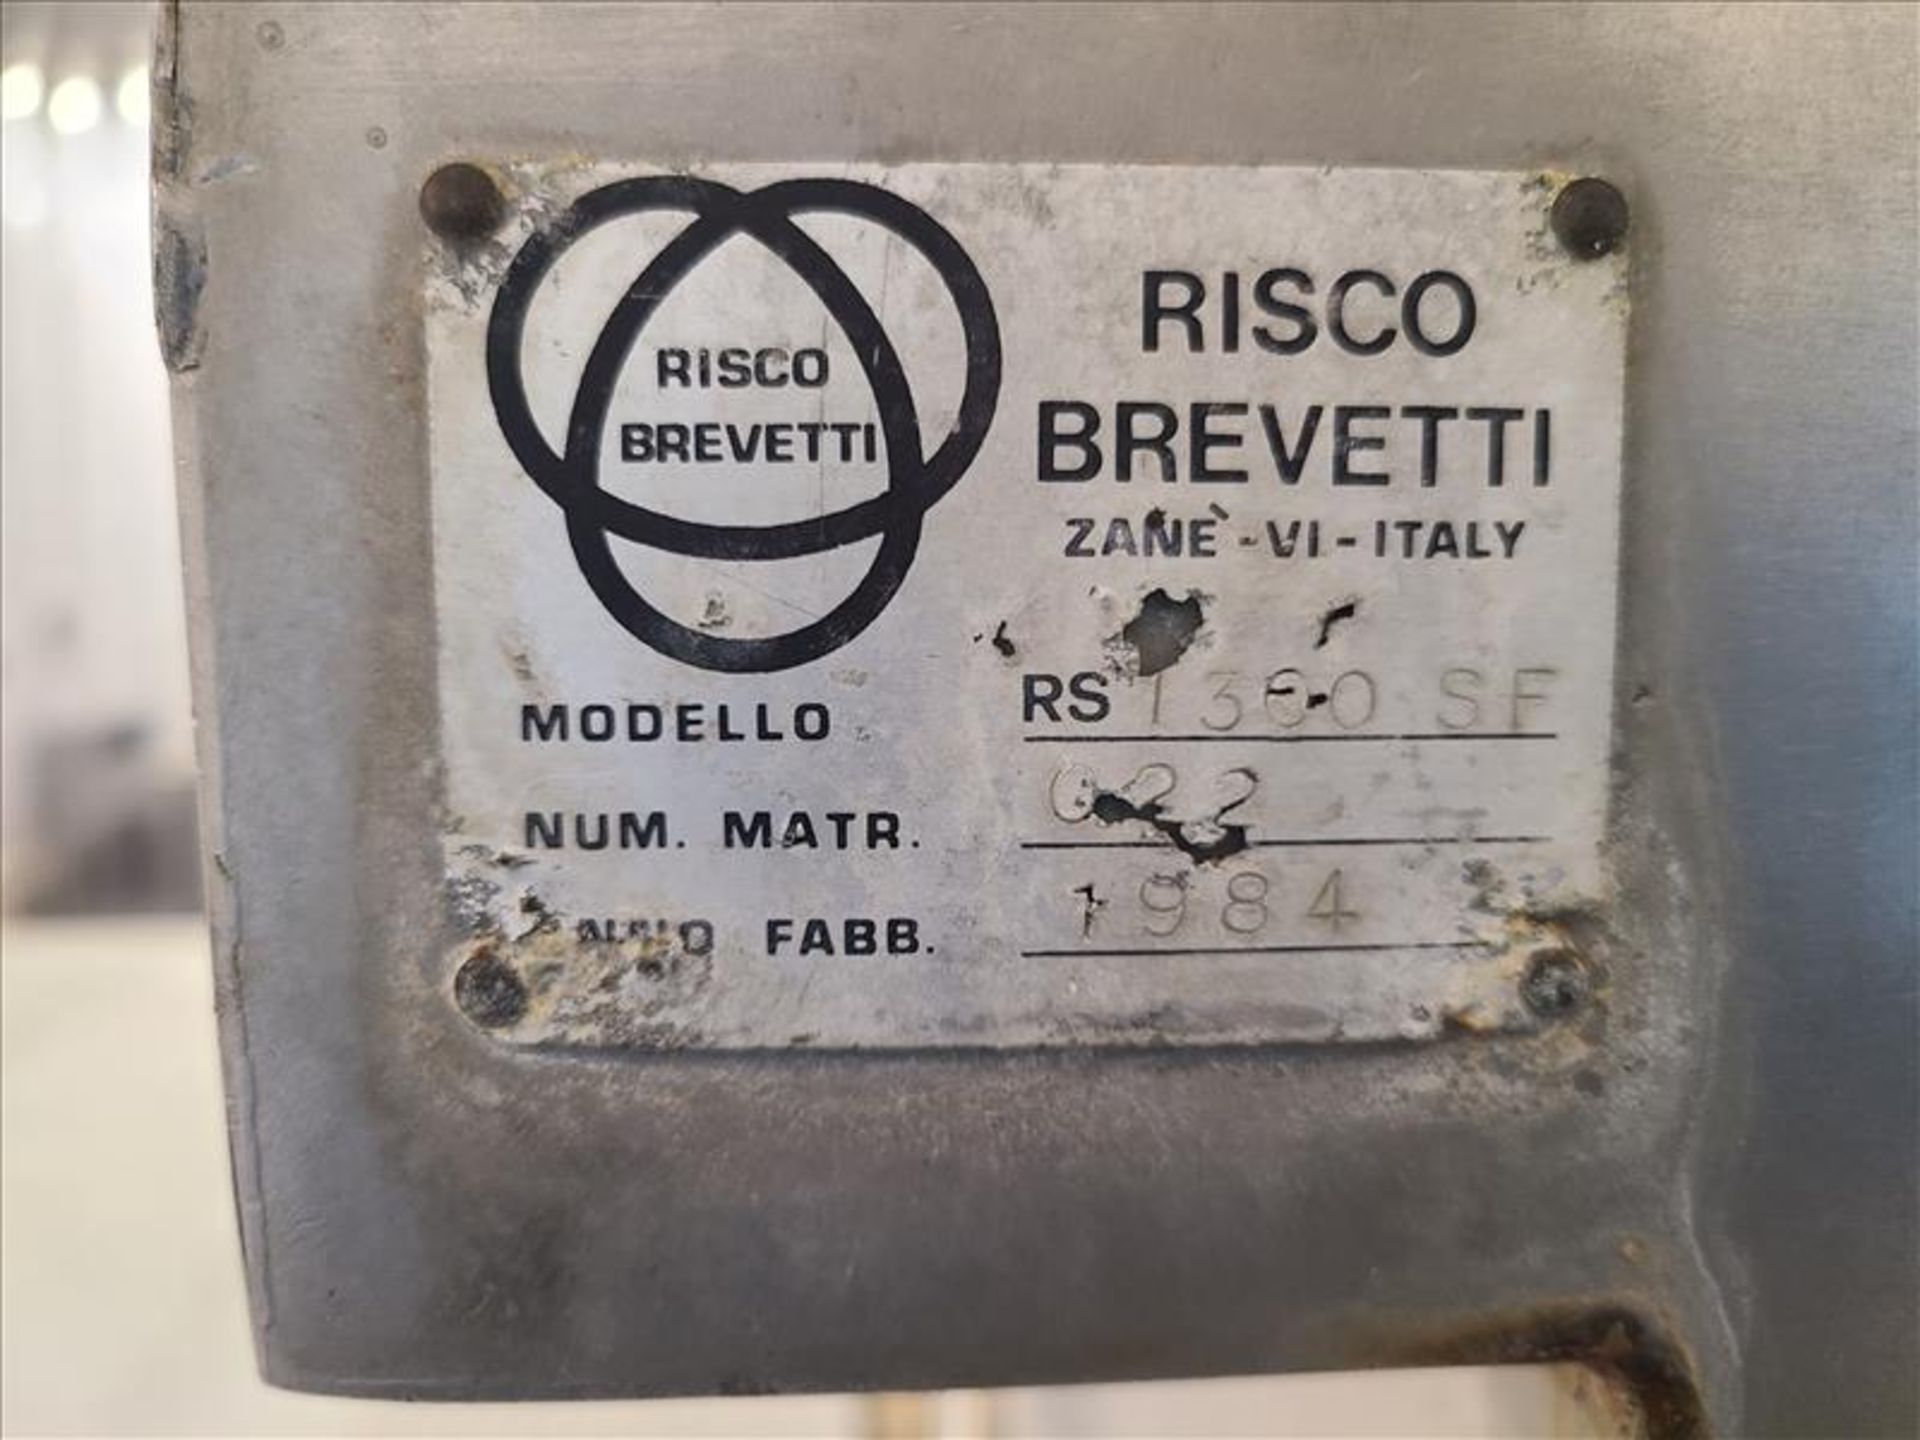 Risco Brevetti Twin Shaft Paddle Mixer, mod. RS 1300 SF, ser. no. 022 [Mixing Room 1] - Image 7 of 7